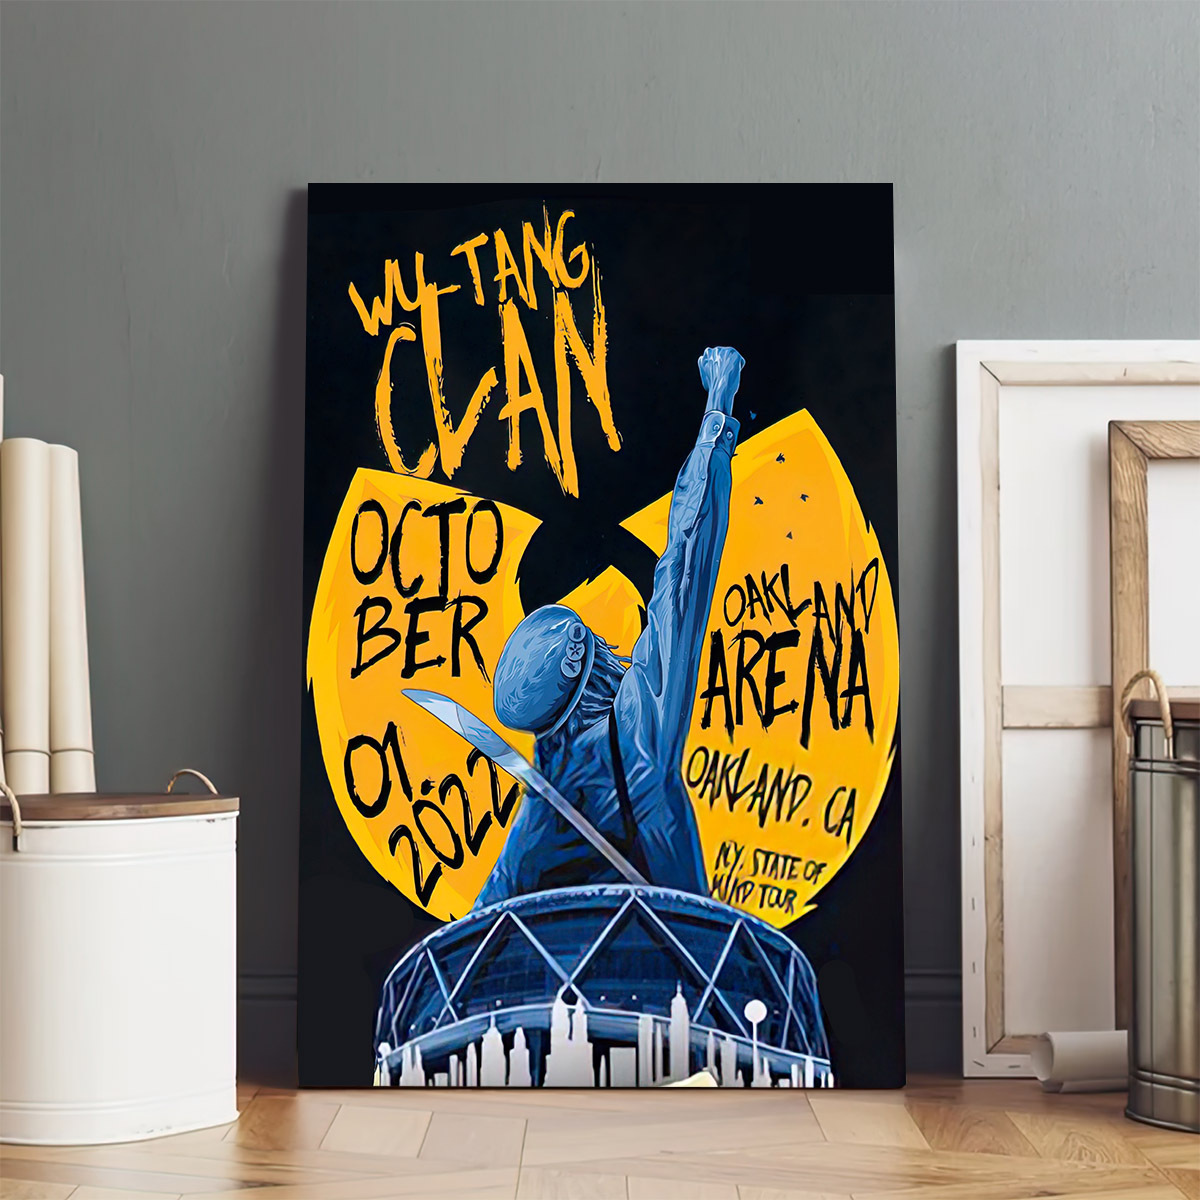 Wu-tang Clan New York State Of Mind Tour 2022 Oakland Arena Poster Canvas